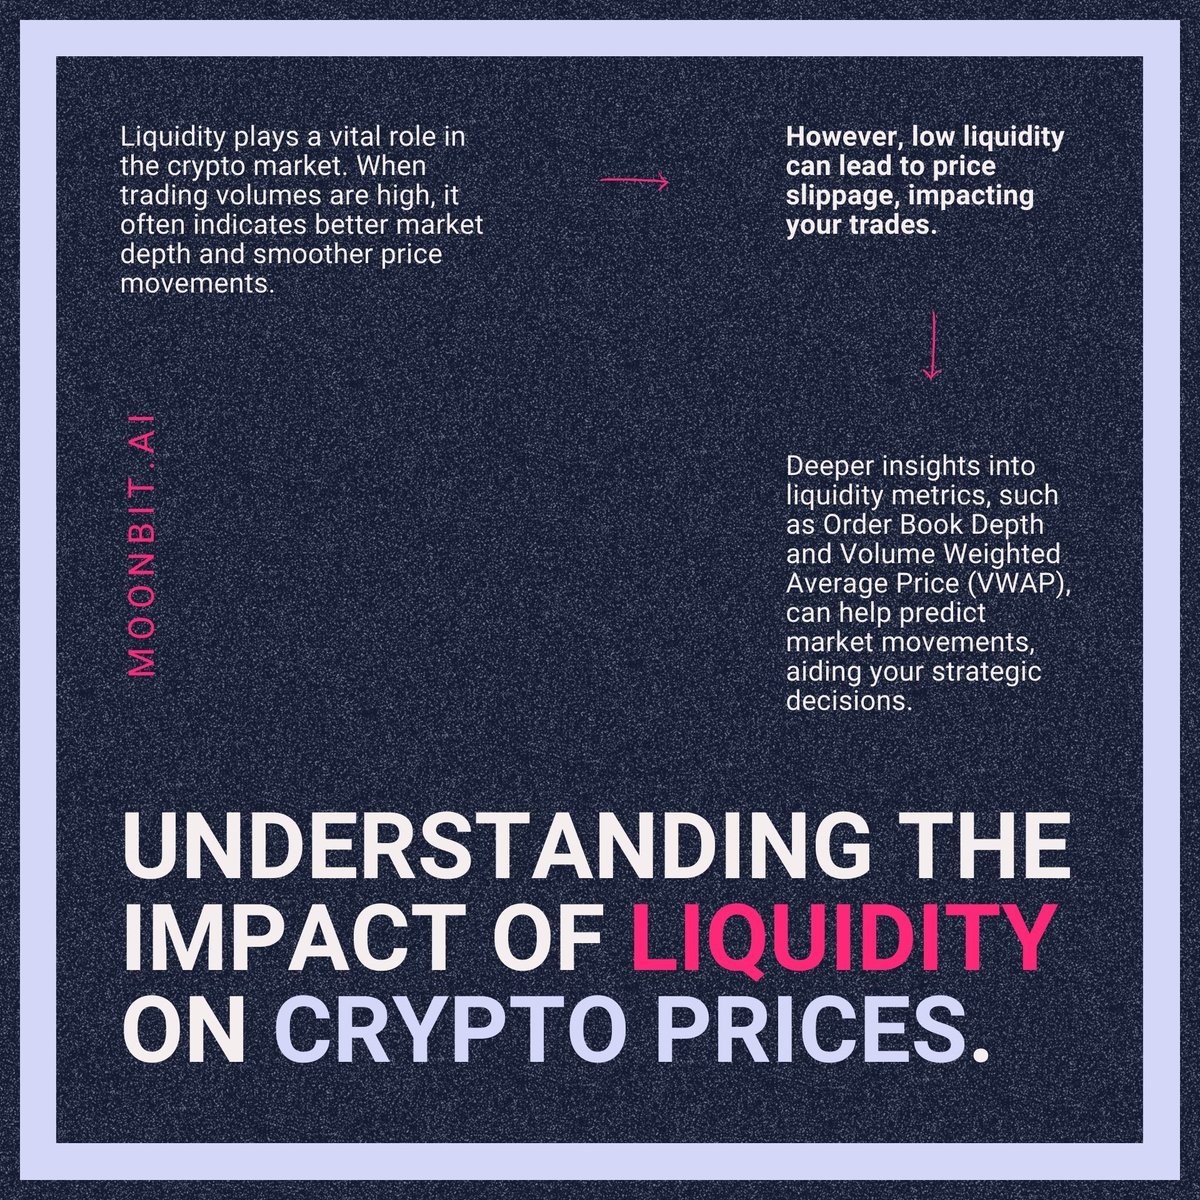 🔍 Today's lesson: Understanding the Impact of Liquidity on Crypto Prices.

📚 Keep learning and mastering these indicators. They're the compass in the vast sea of crypto trading! 🧭📊 

#CryptoTradingInsights #LiquidityMatters #ConstantLearning